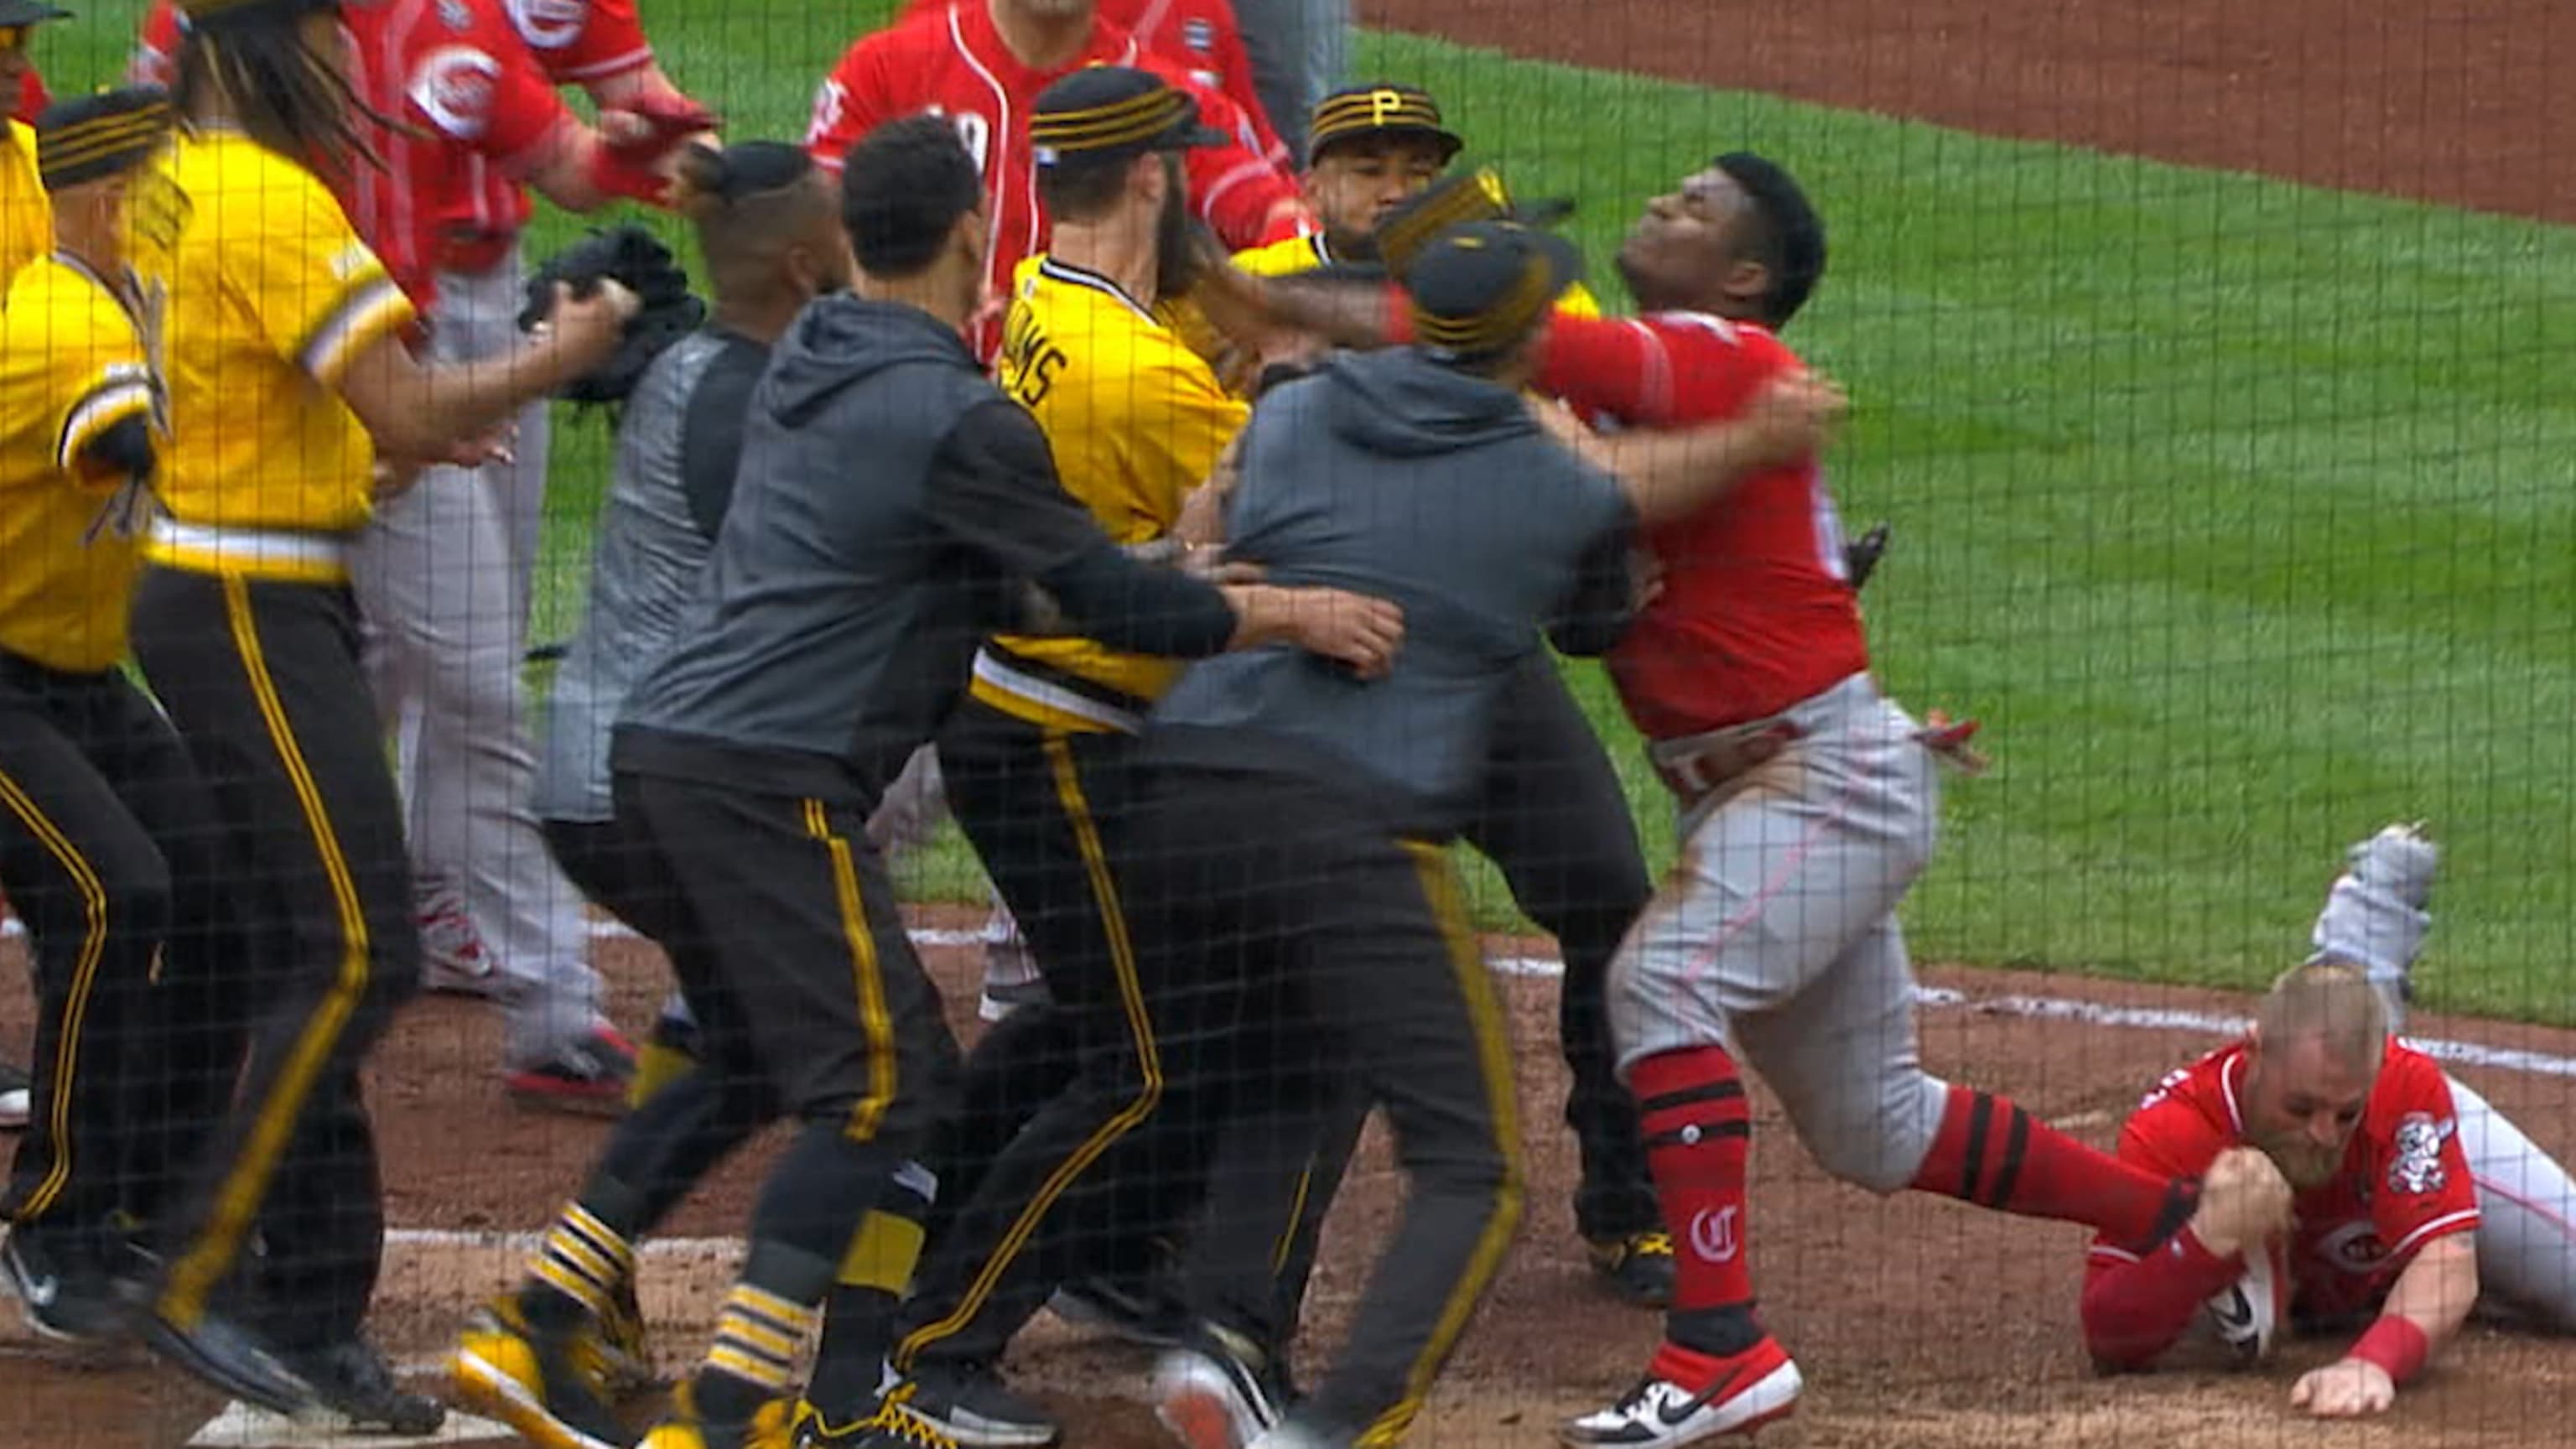 Yasiel Puig, David Bell Ejected After Benches Clear in Pirates vs. Reds, News, Scores, Highlights, Stats, and Rumors